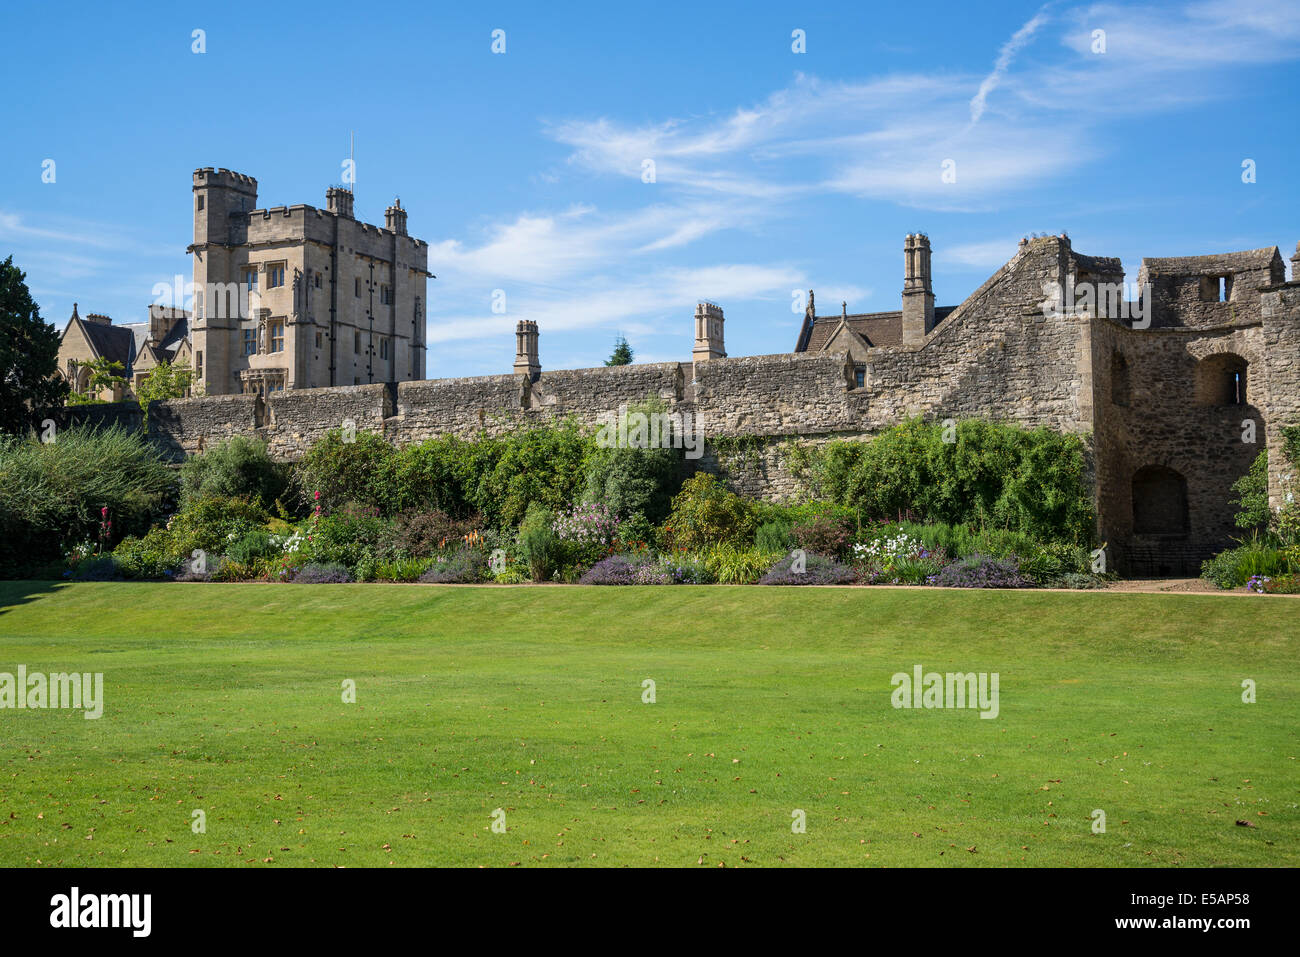 Gardens with City Wall and herbaceous border, New College, Oxford, England, UK Stock Photo